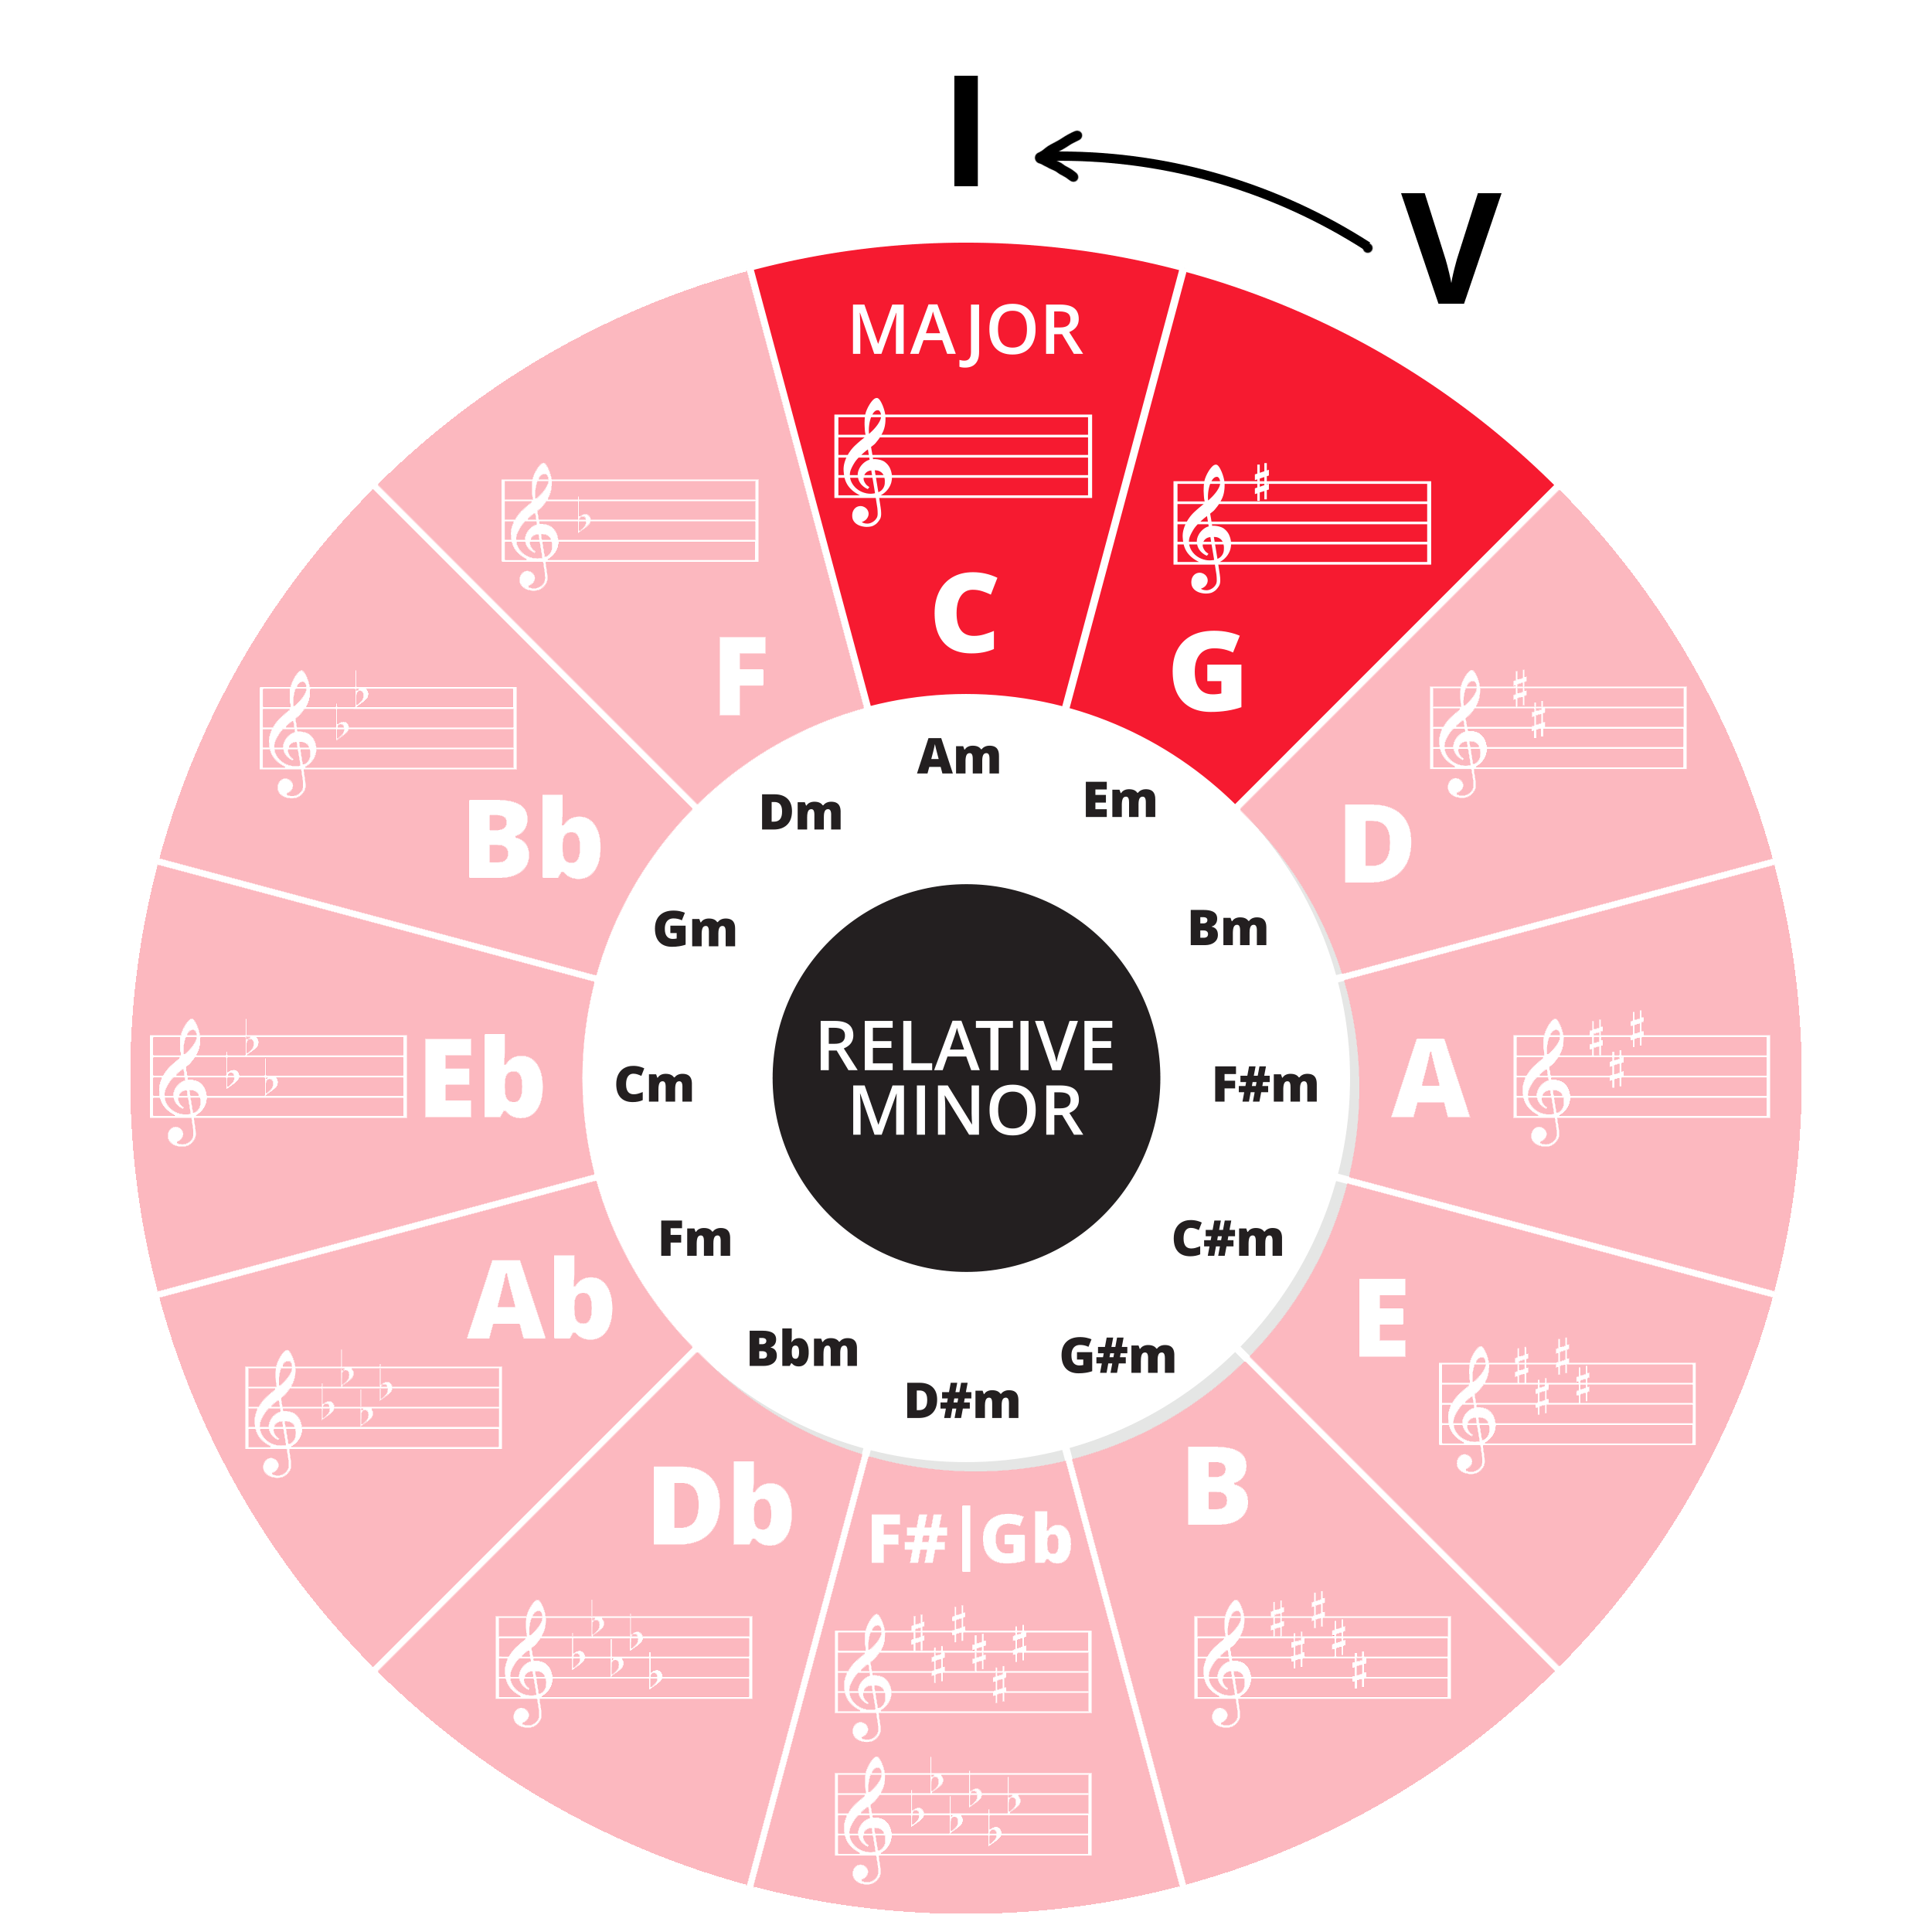 Circle of Fifths in pink with C and G in red. V with arrow going to I above G and C, respectively.